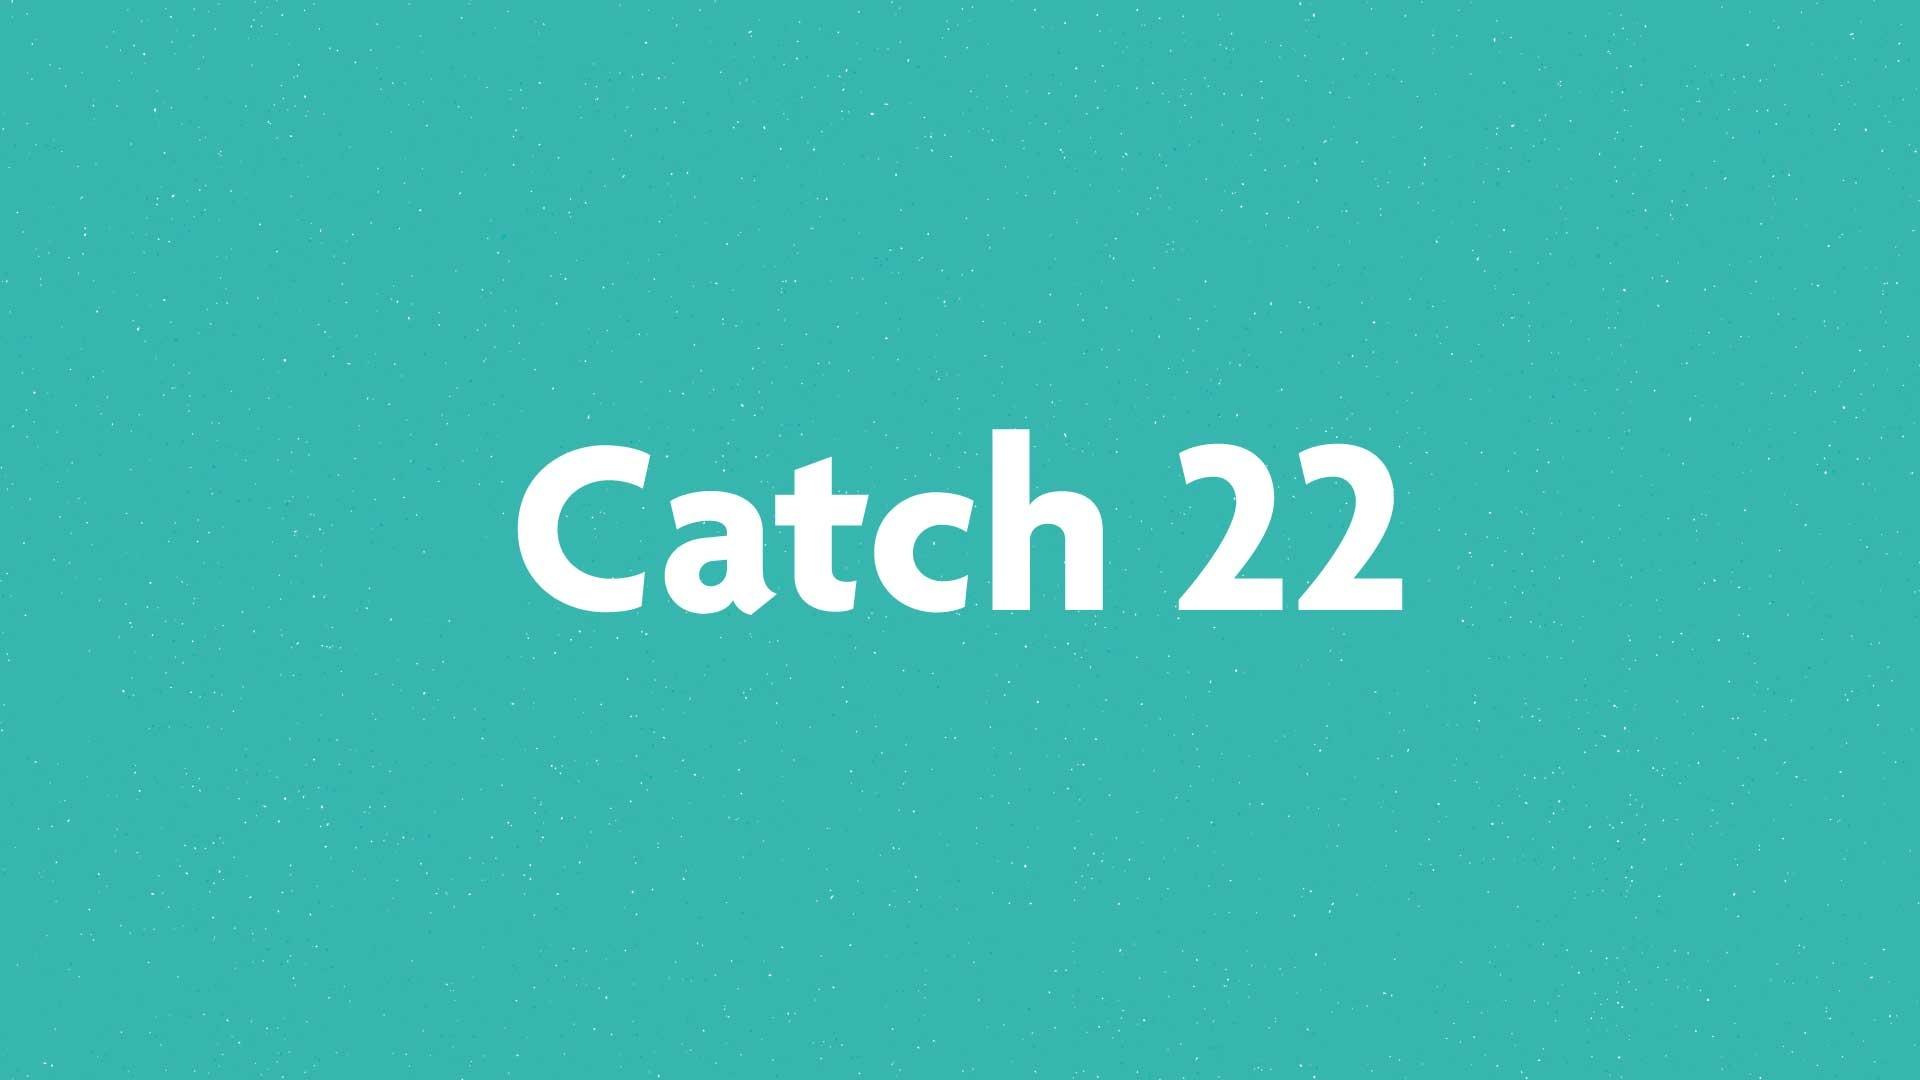 Catch 22 book submission card on a green background.